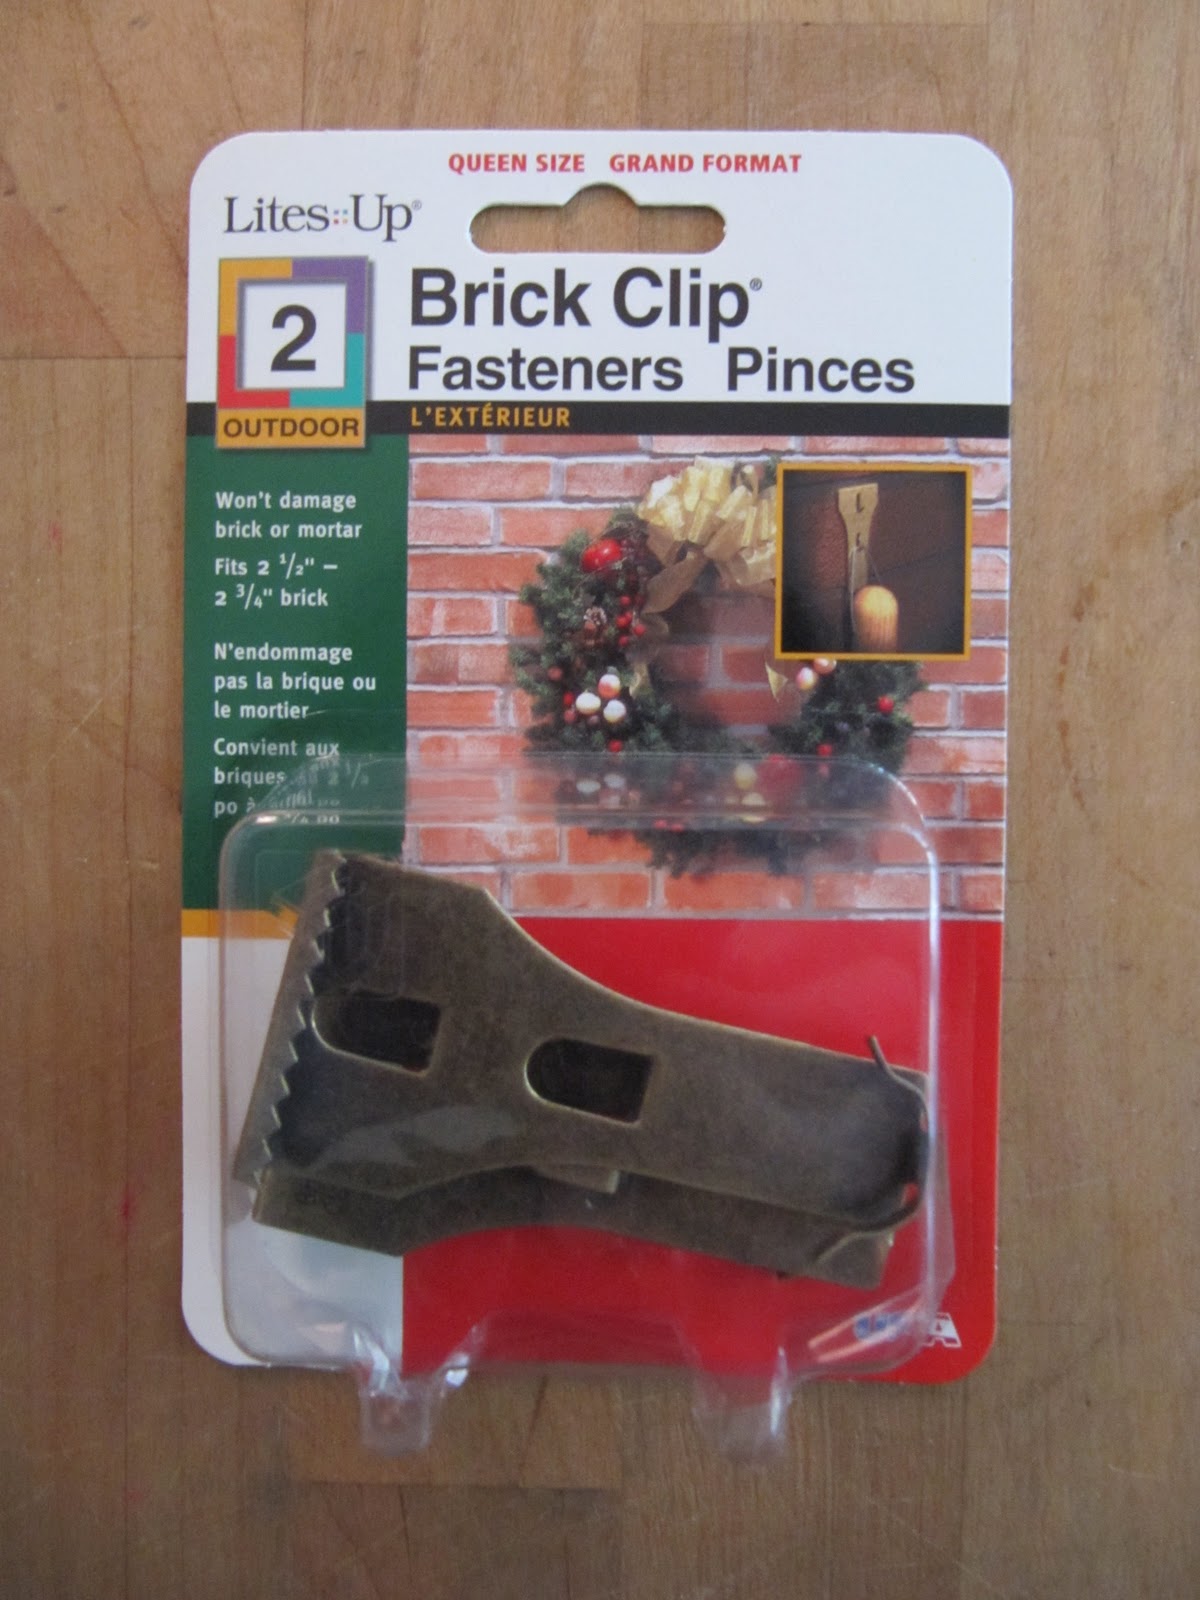 Brick Clip for hanging decorations with out drilling into brick